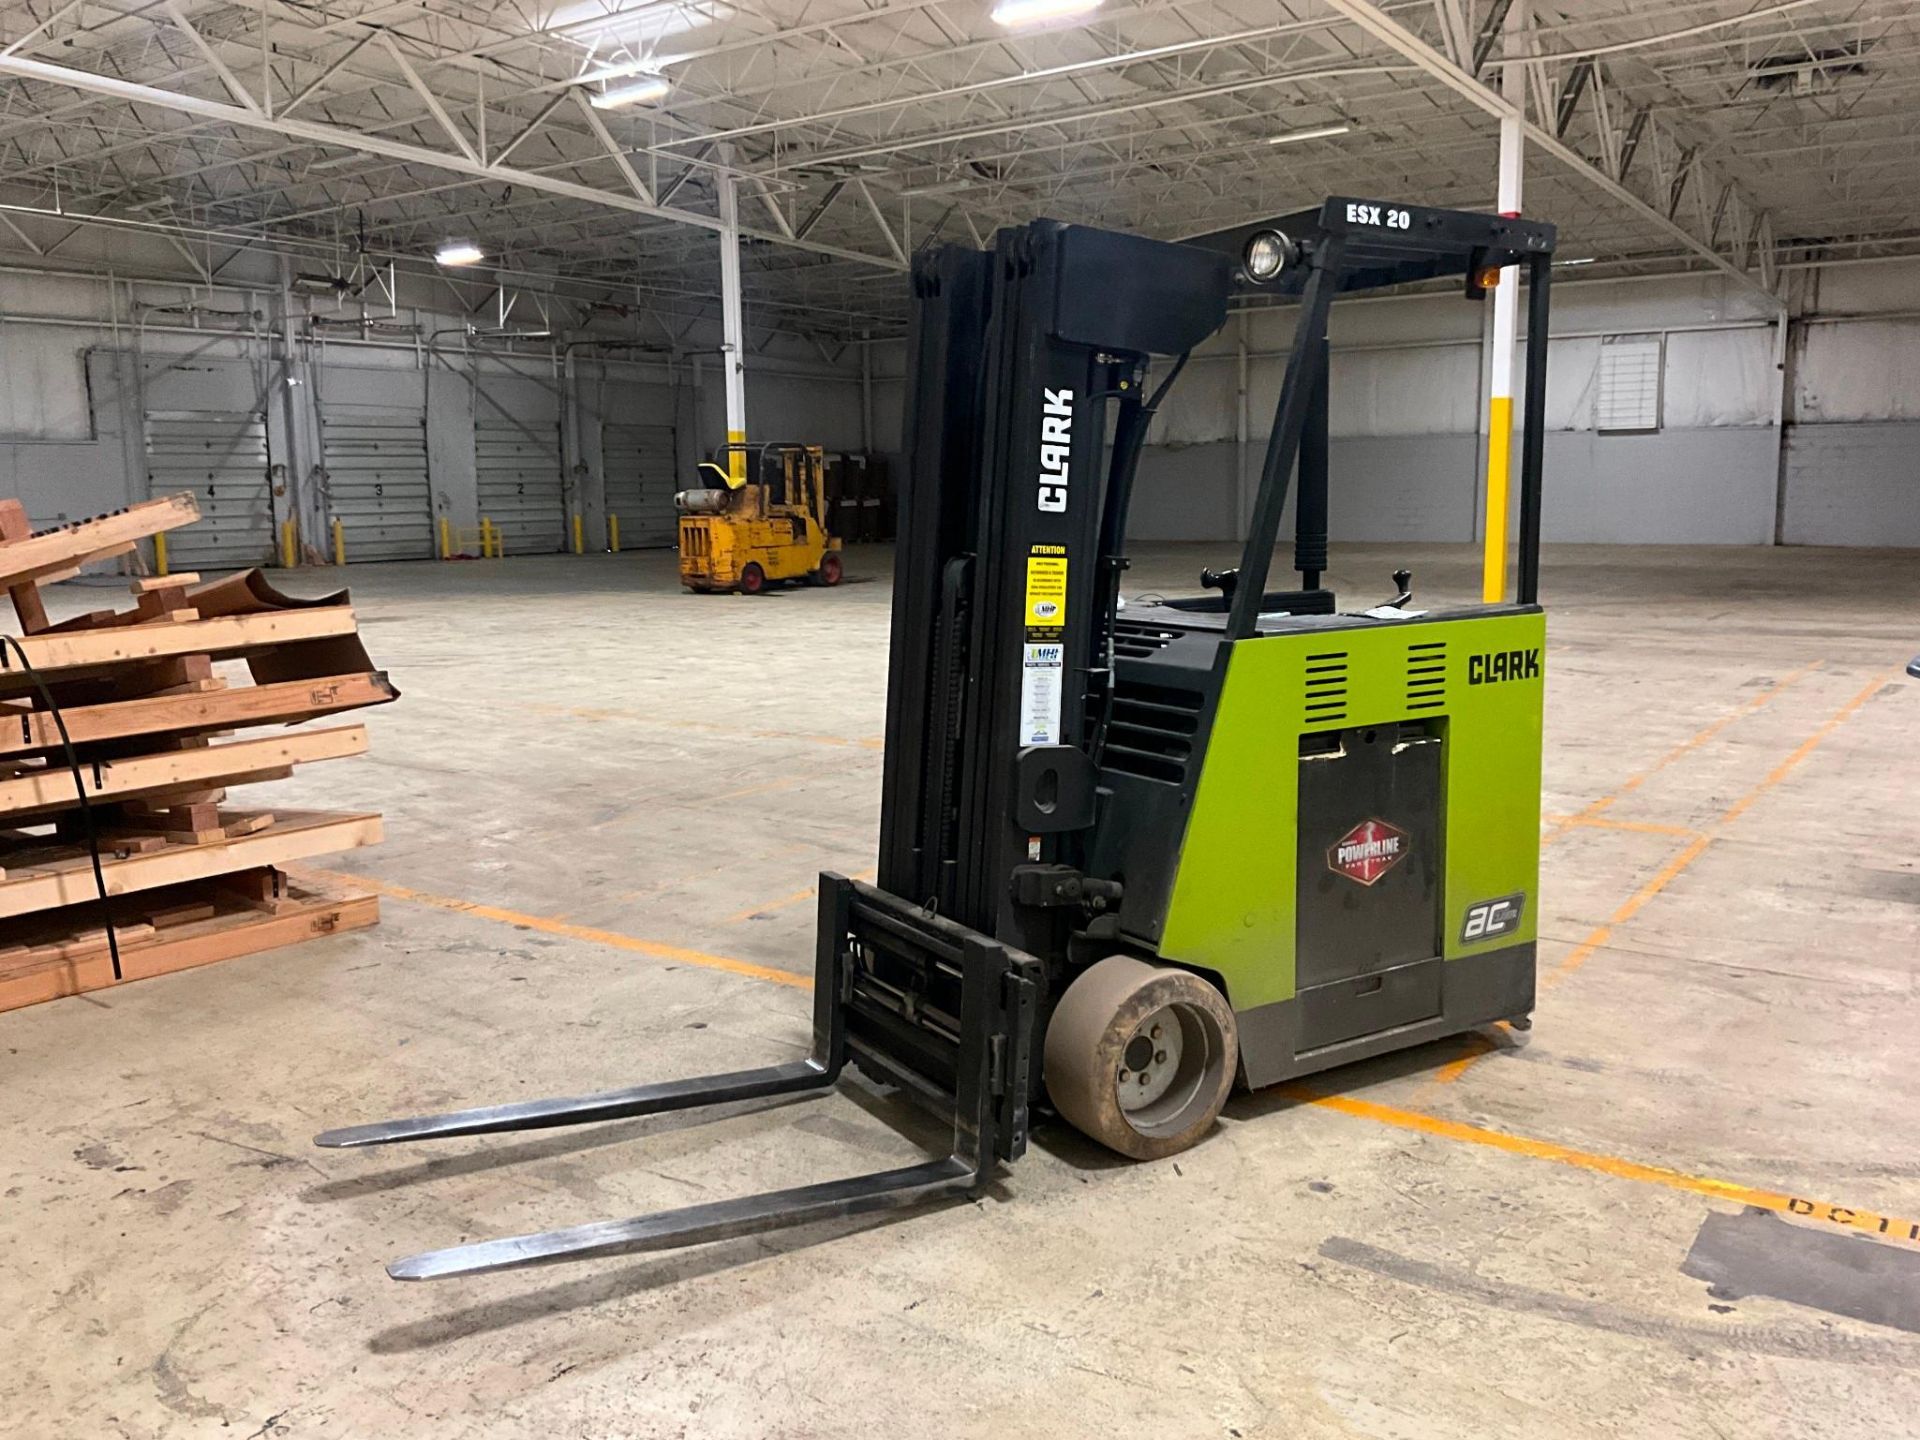 CLARK ESX 20 2400 LBS ELECTRIC FORKLIFT - Image 2 of 10